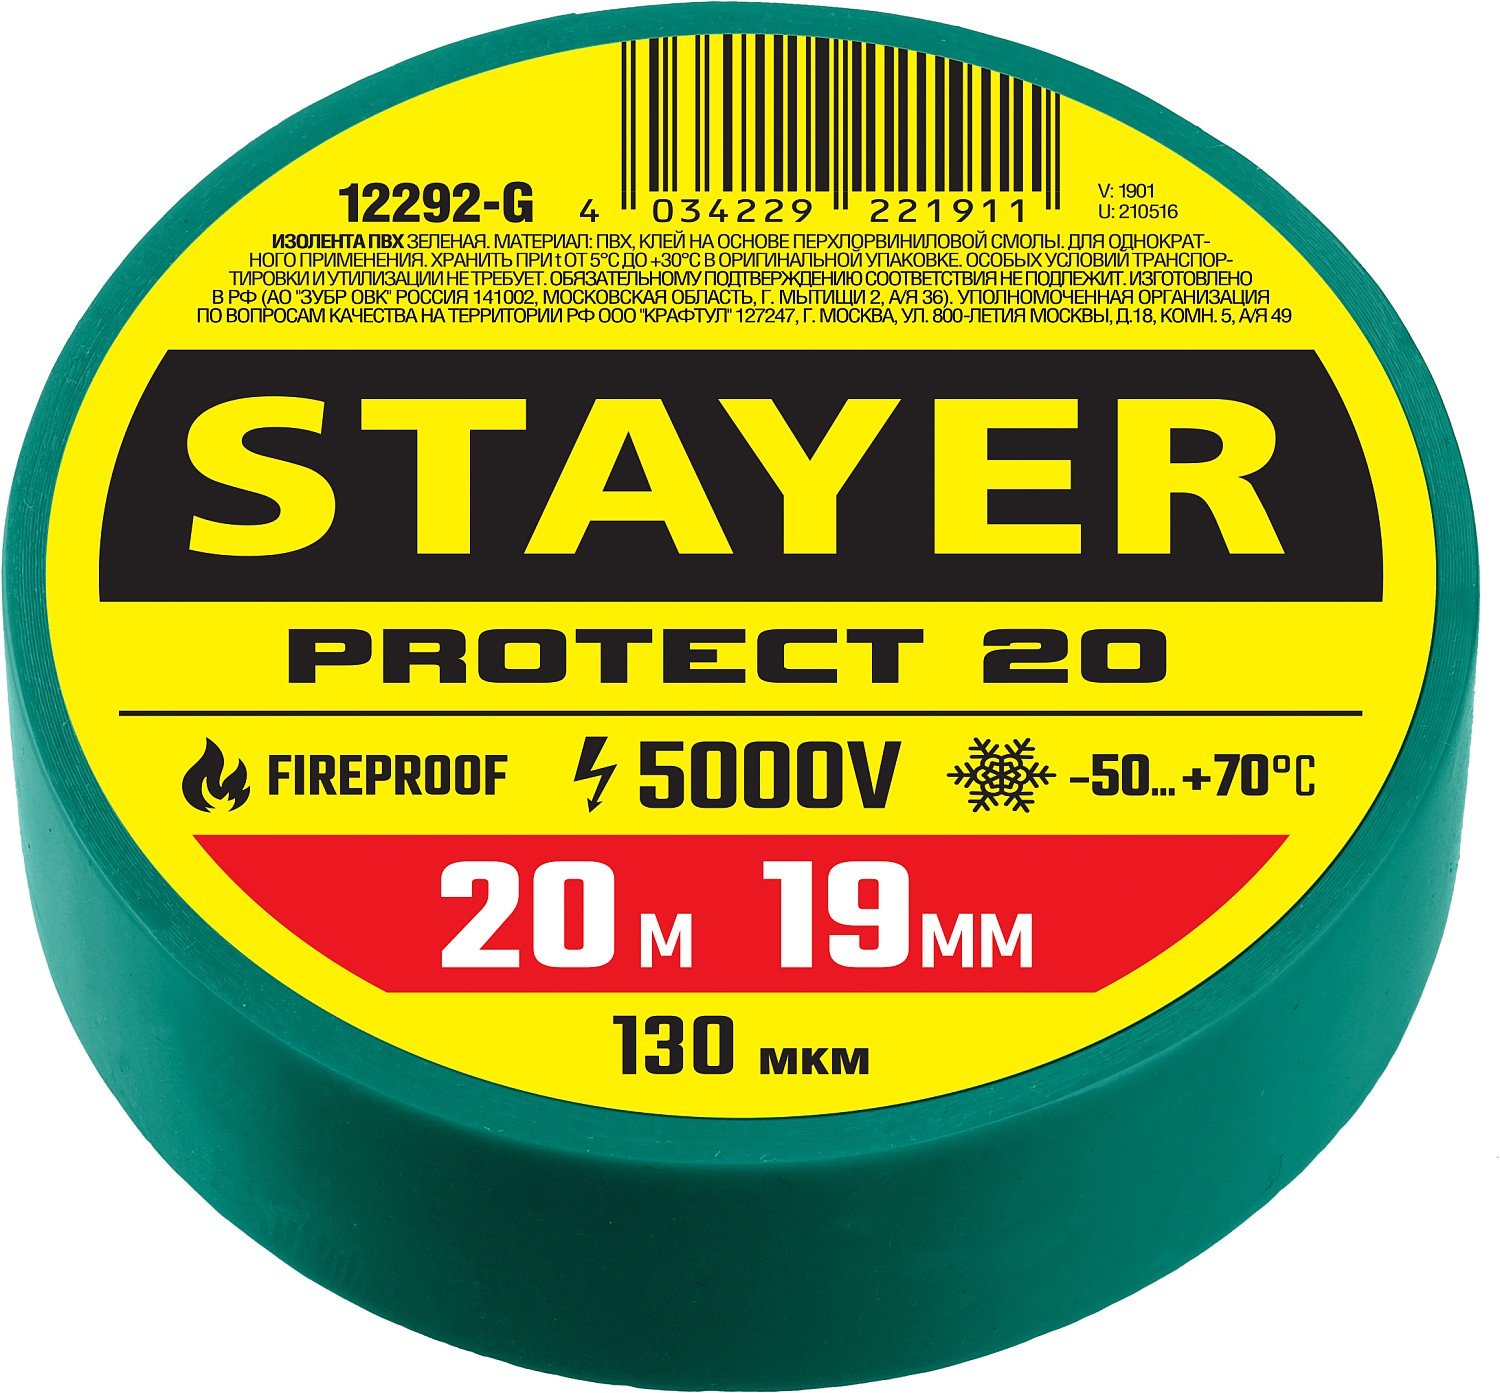    STAYER Protect-20 19   20   (12292-G)